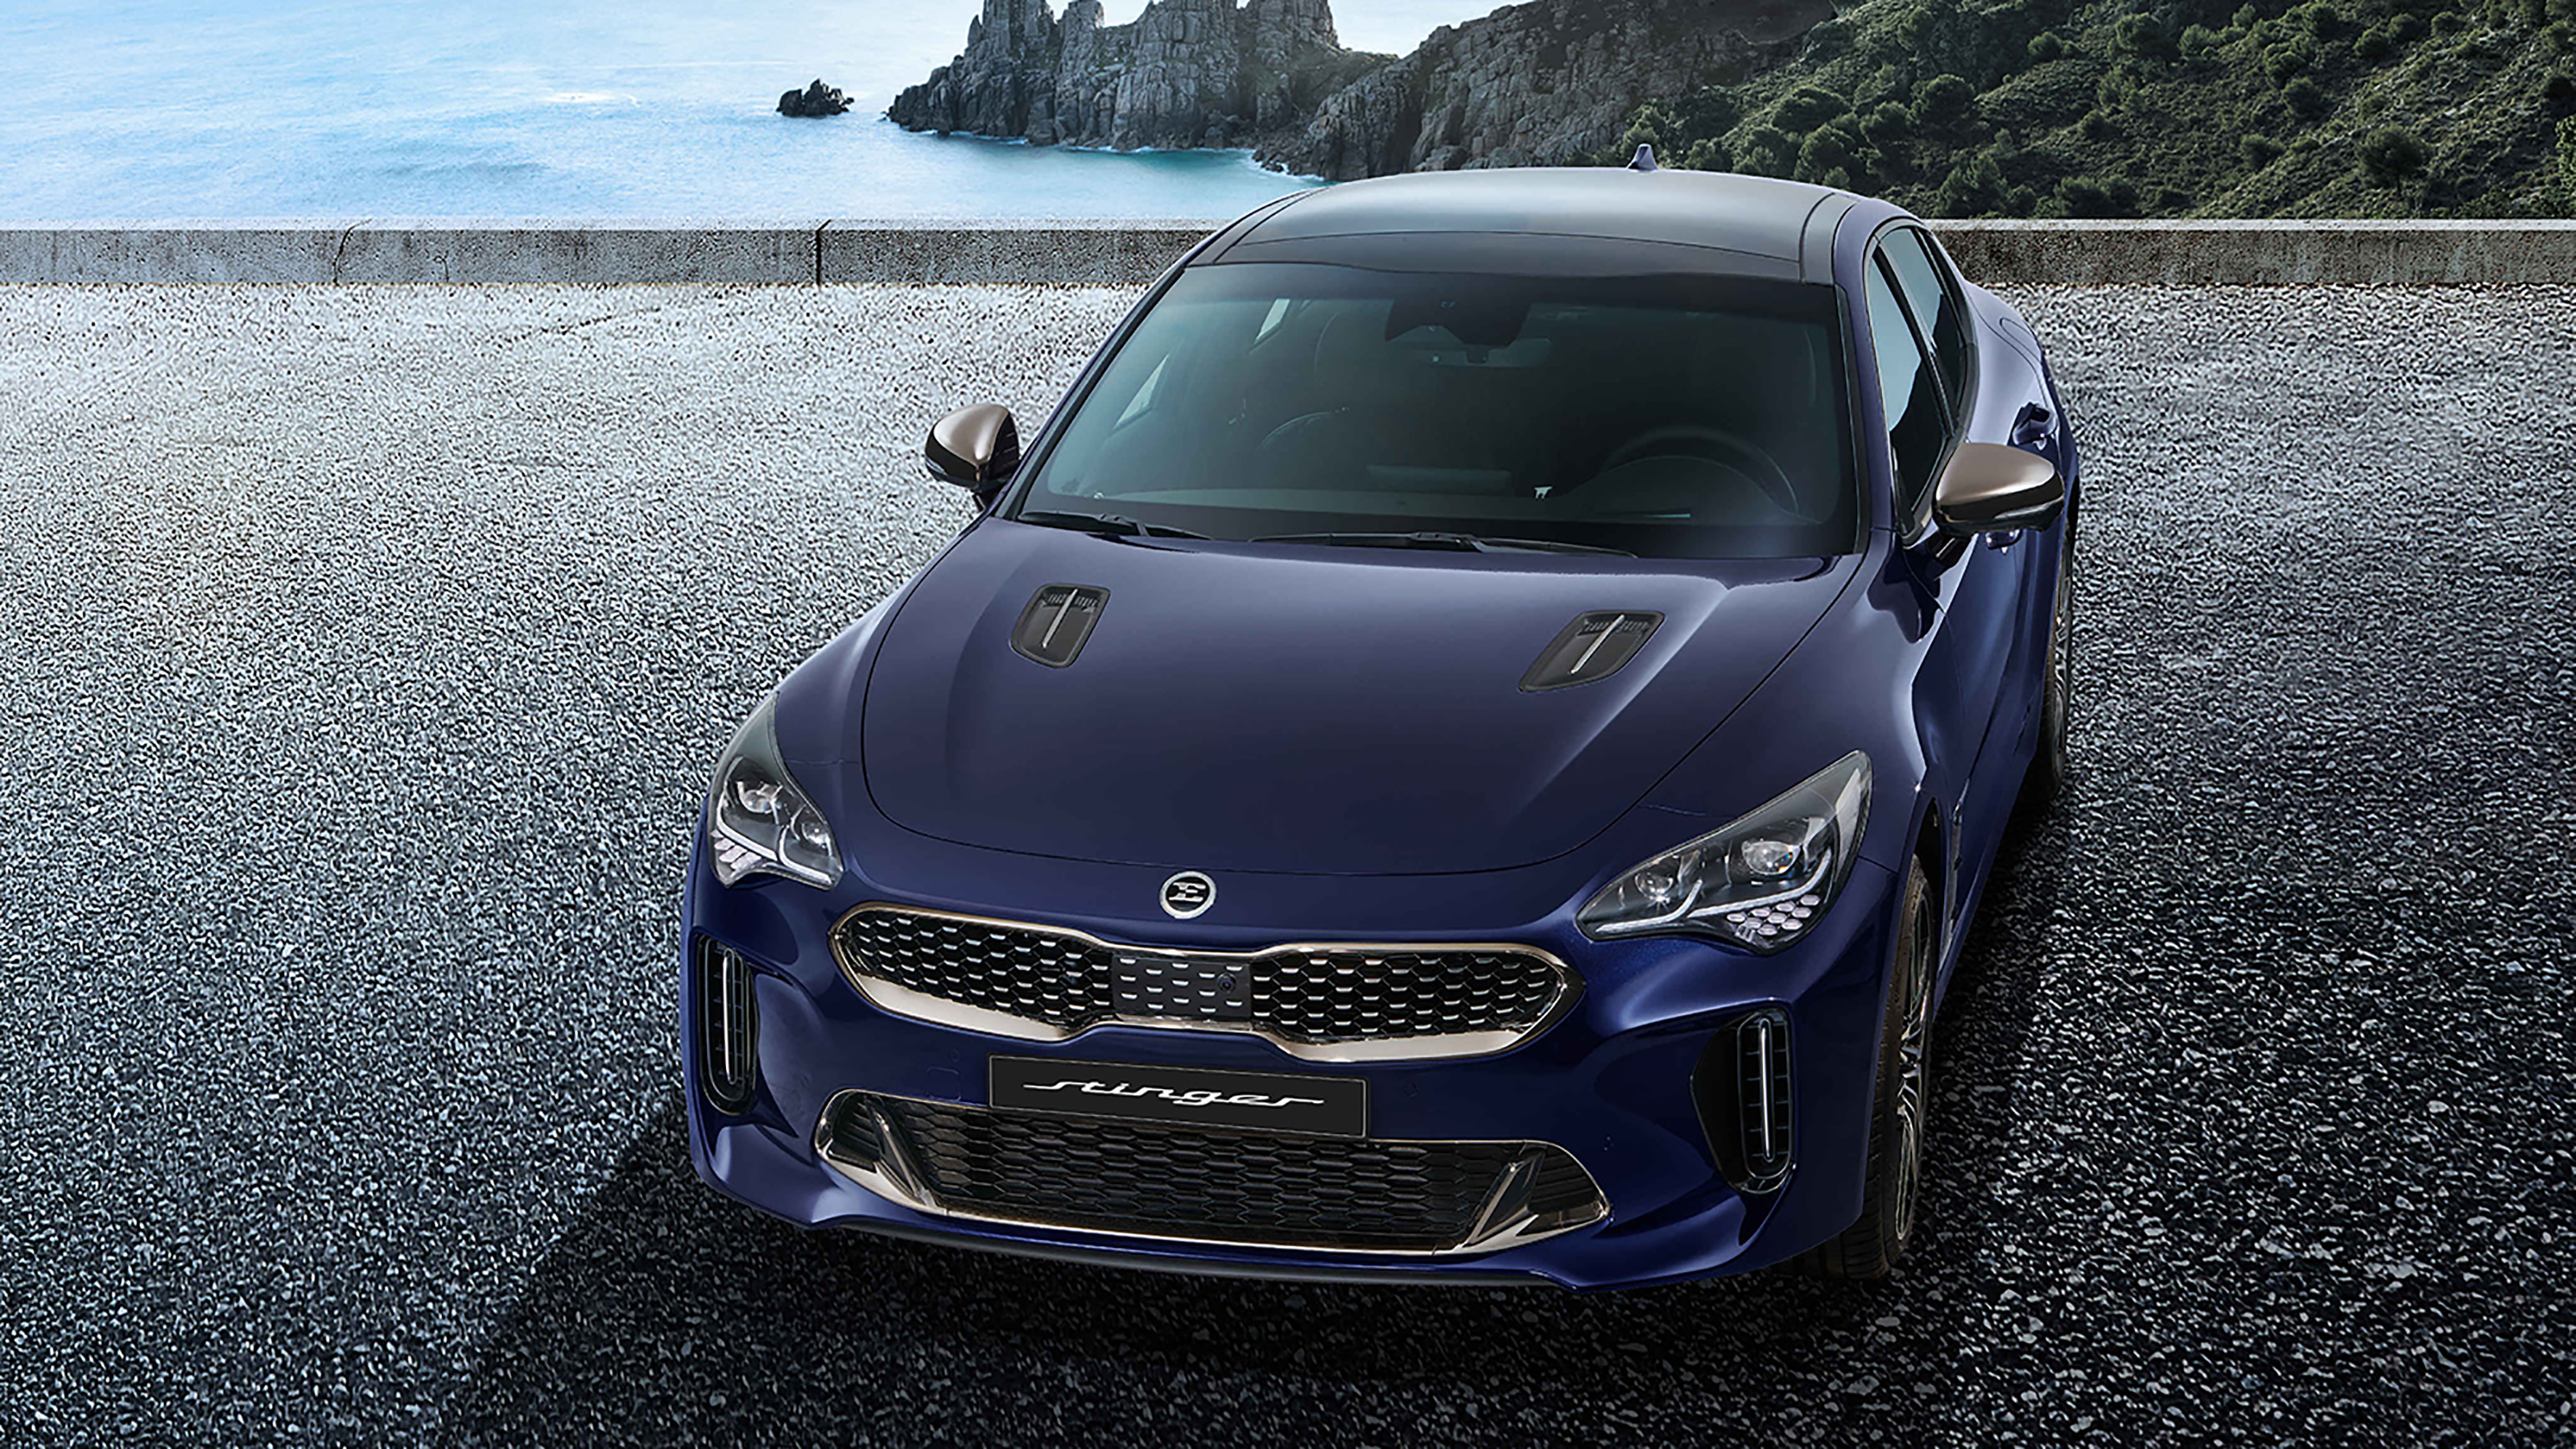 New 2022 Kia Stinger facelift revealed with new look and 